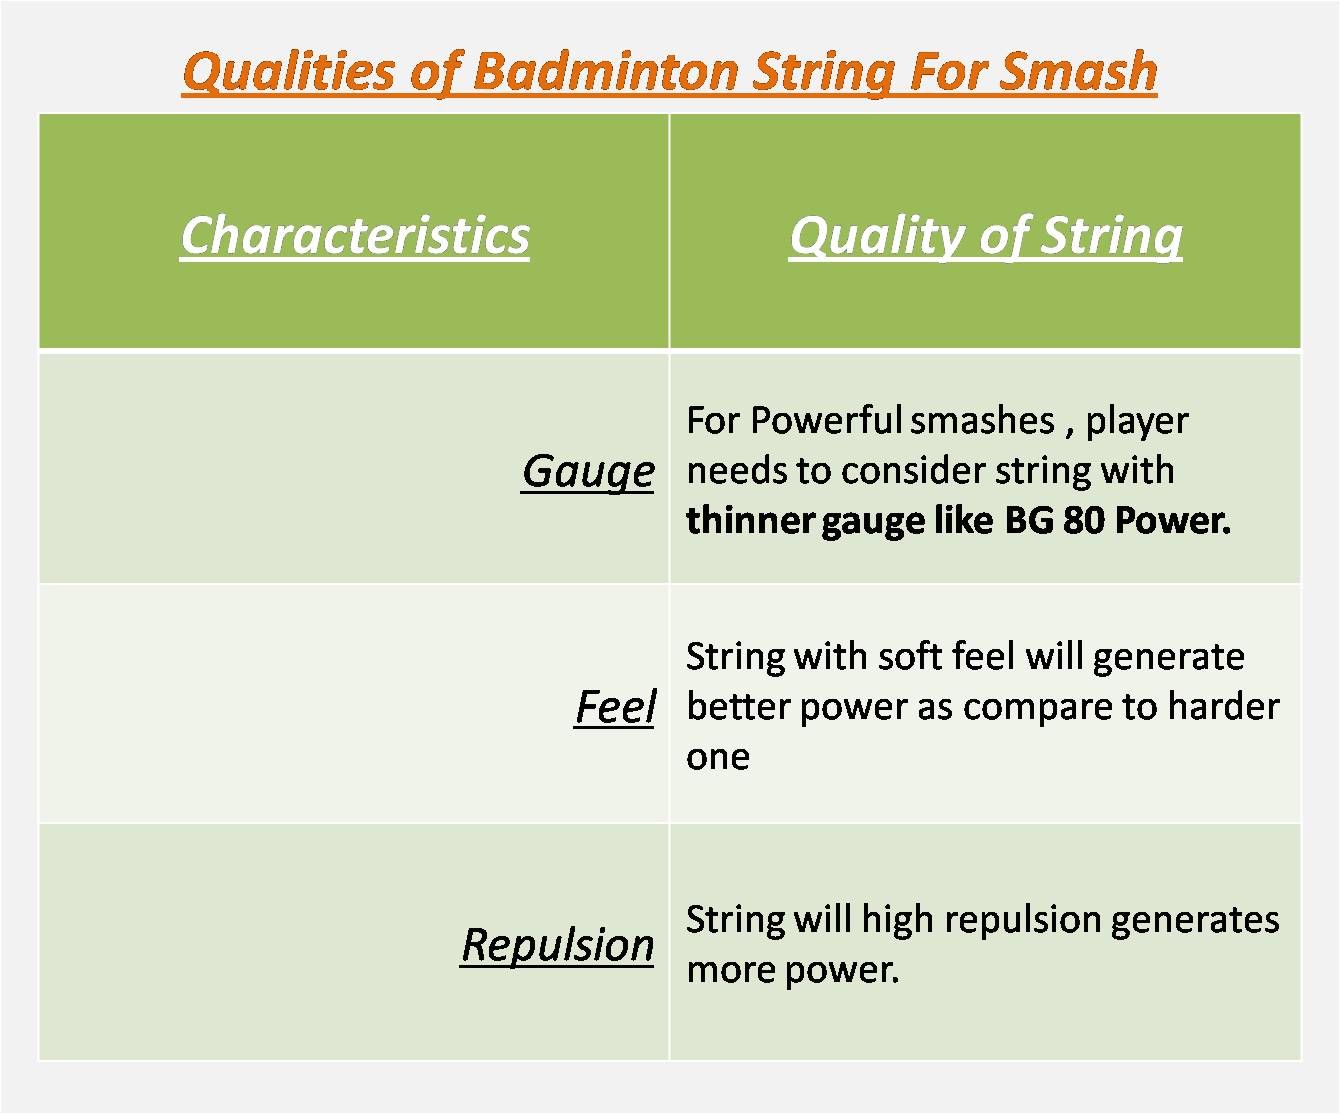 Qualities_of_Badminton_String_For_Smash